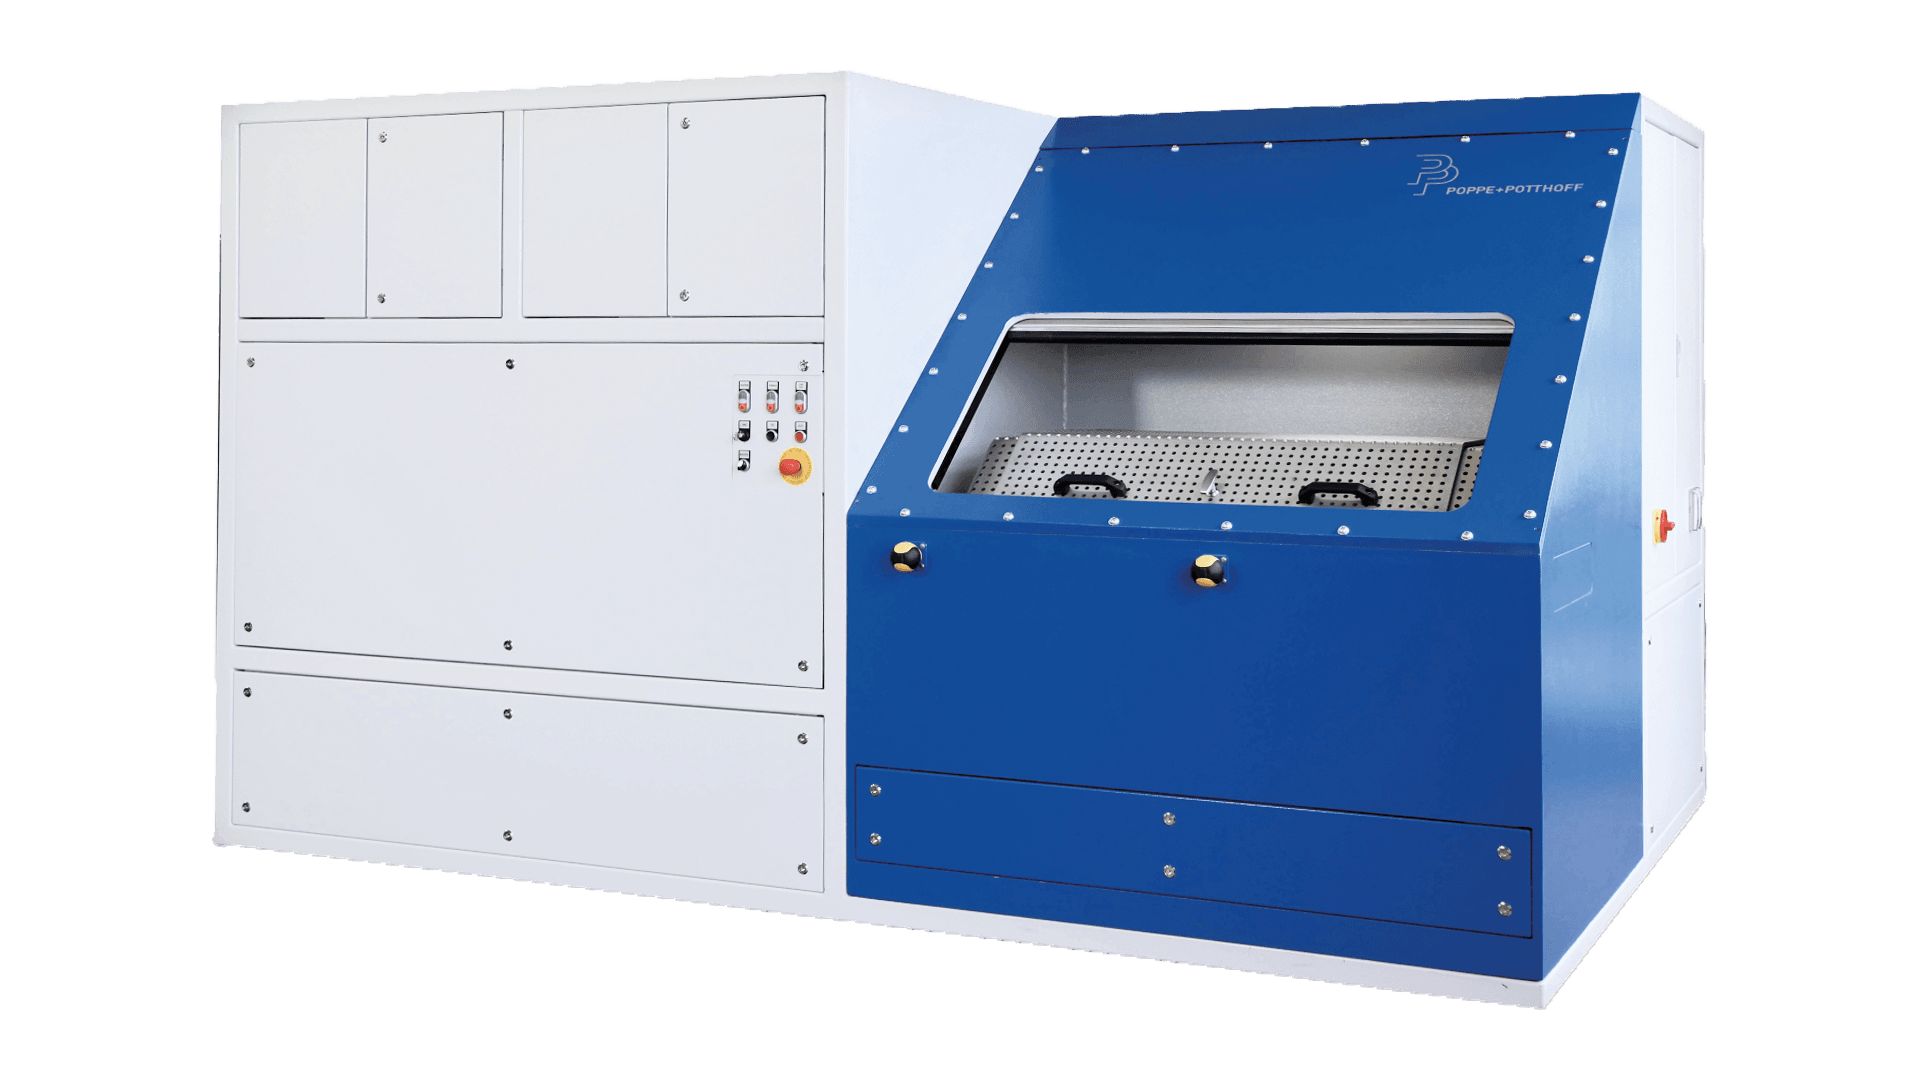 Large burst test rig with blue stainless steel test chamber